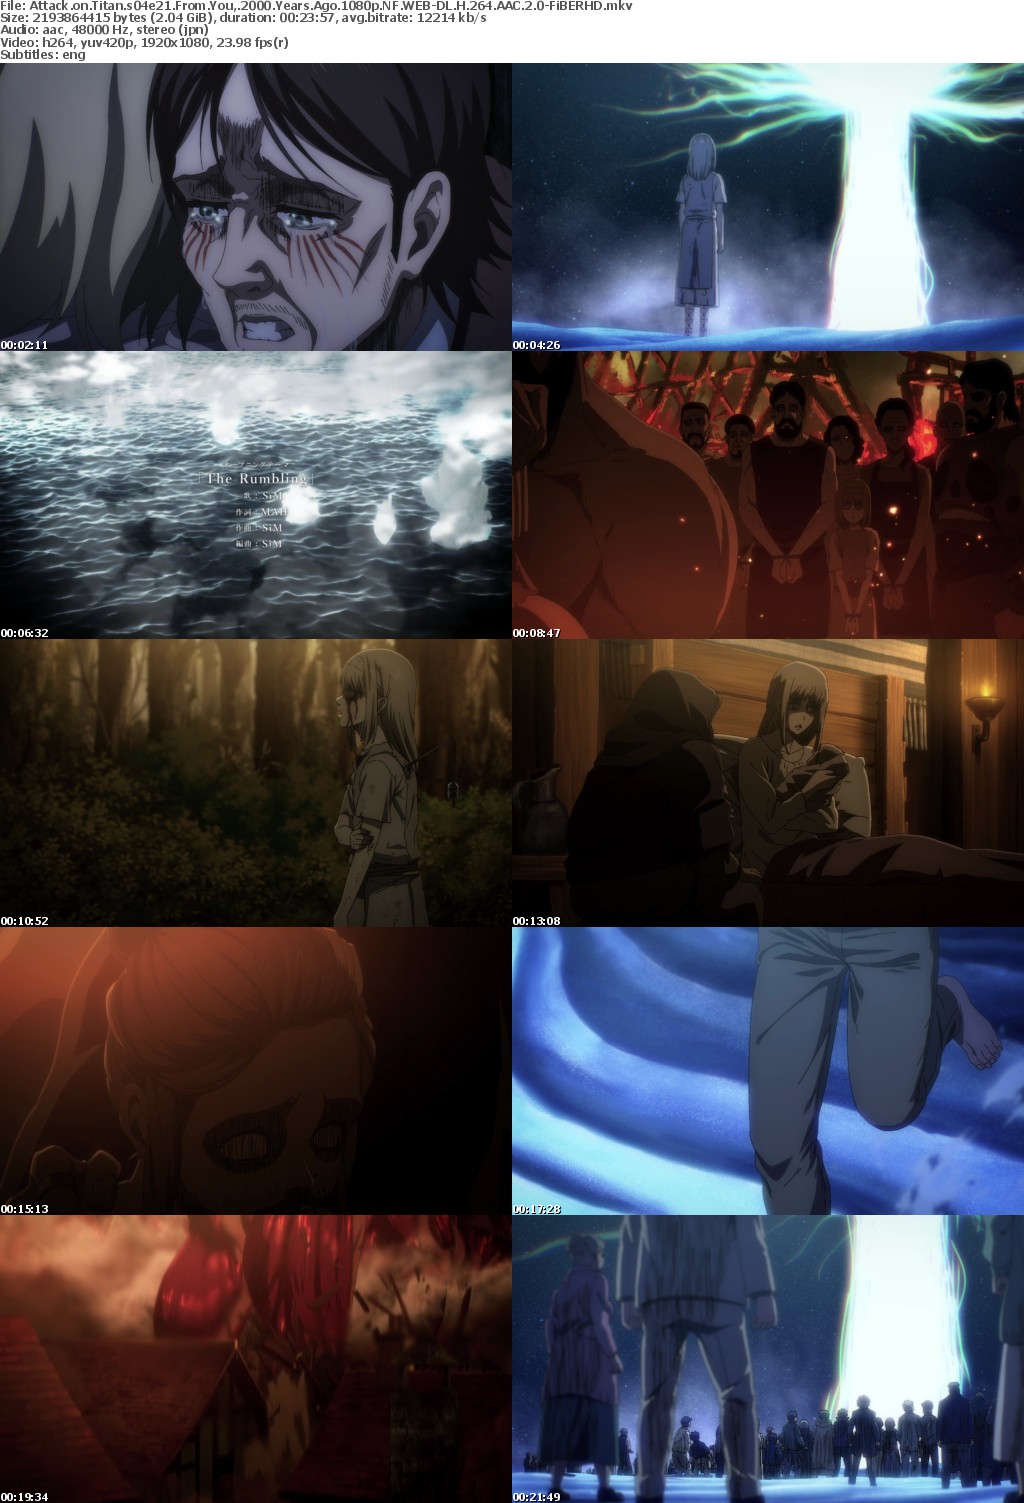 Attack on Titan s04e21 From You, 2000 Years Ago 1080p NF WEB-DL H 264 AAC 2 0-FiBERHD